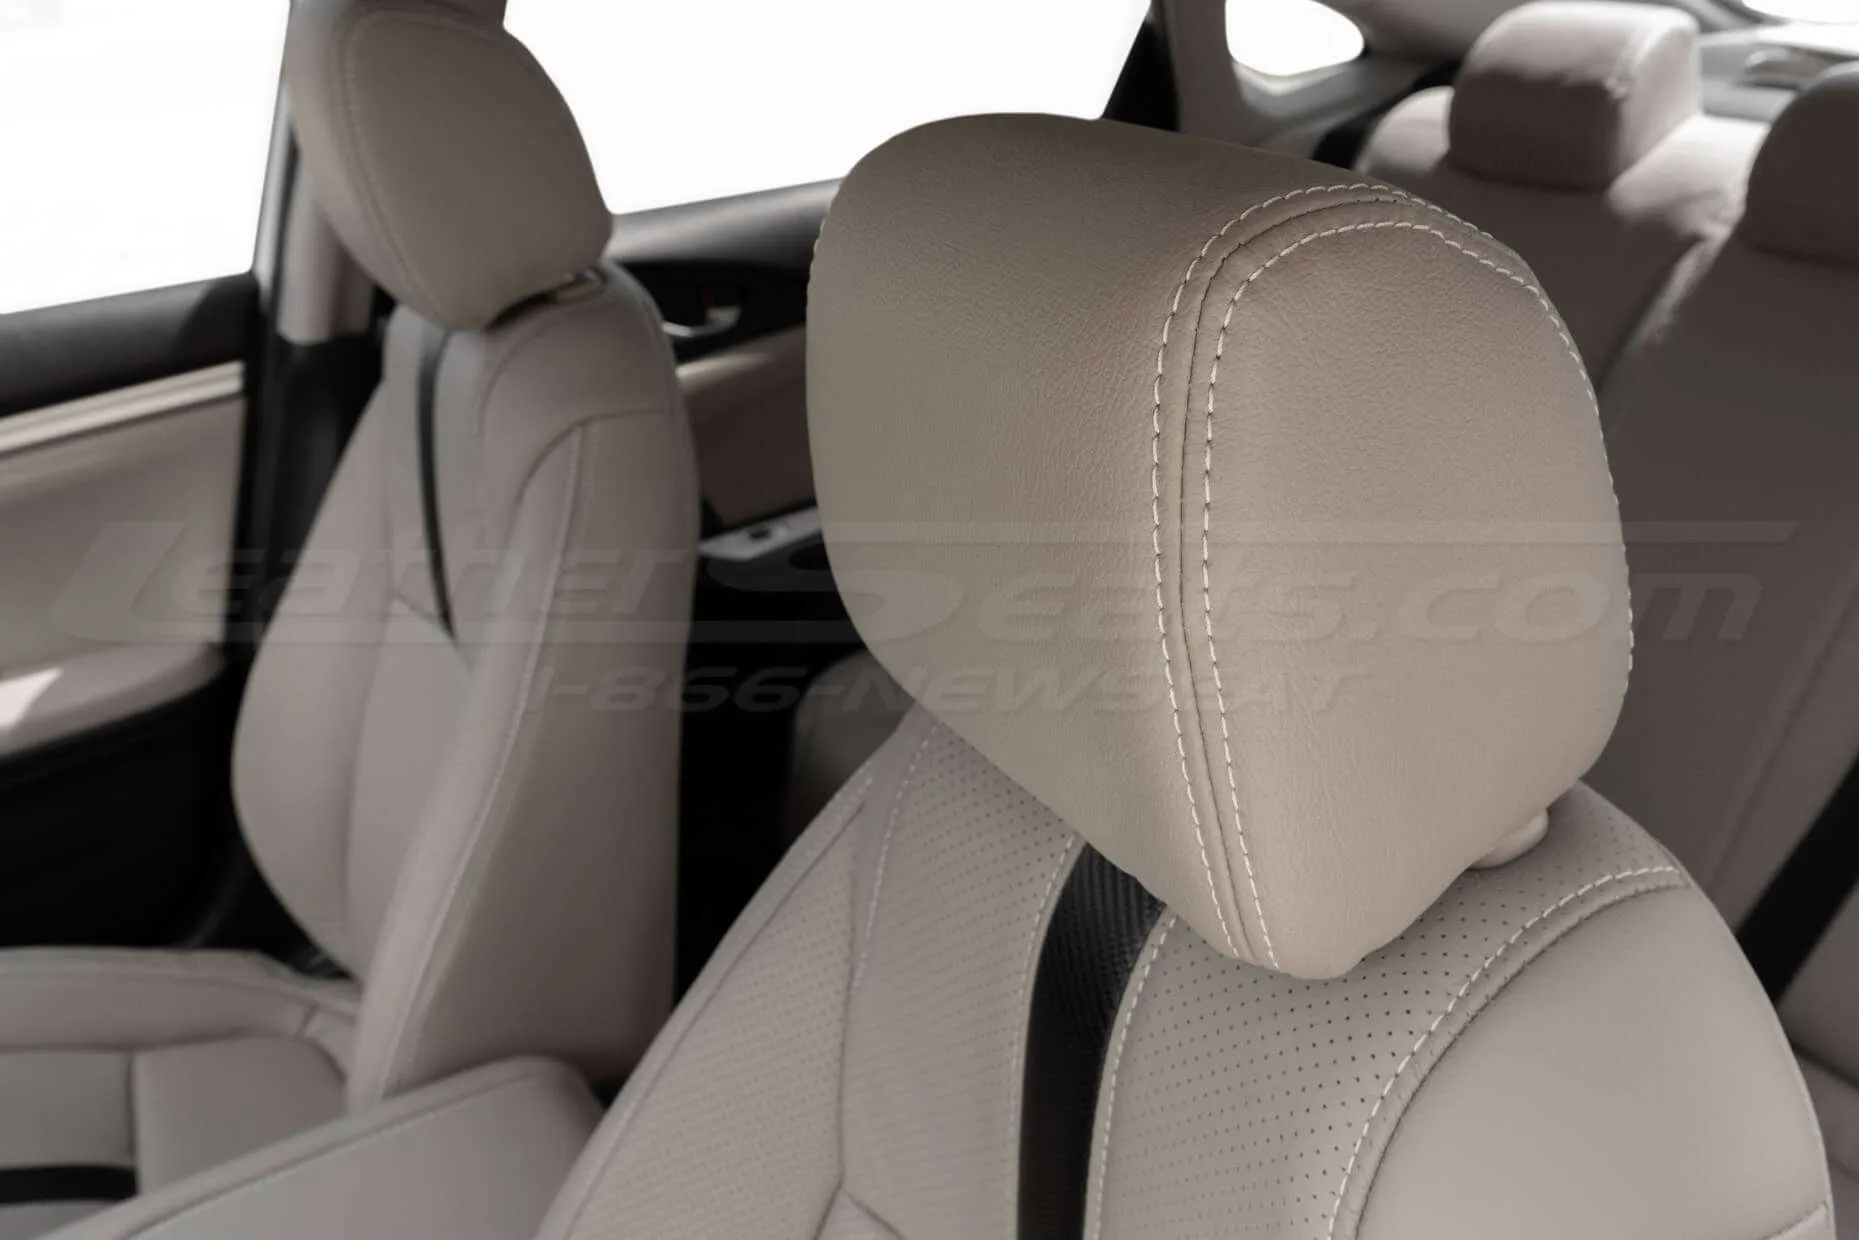 Honda Civic leather headrest close-up - Beach leather with contrasting Alabaster double-stitching